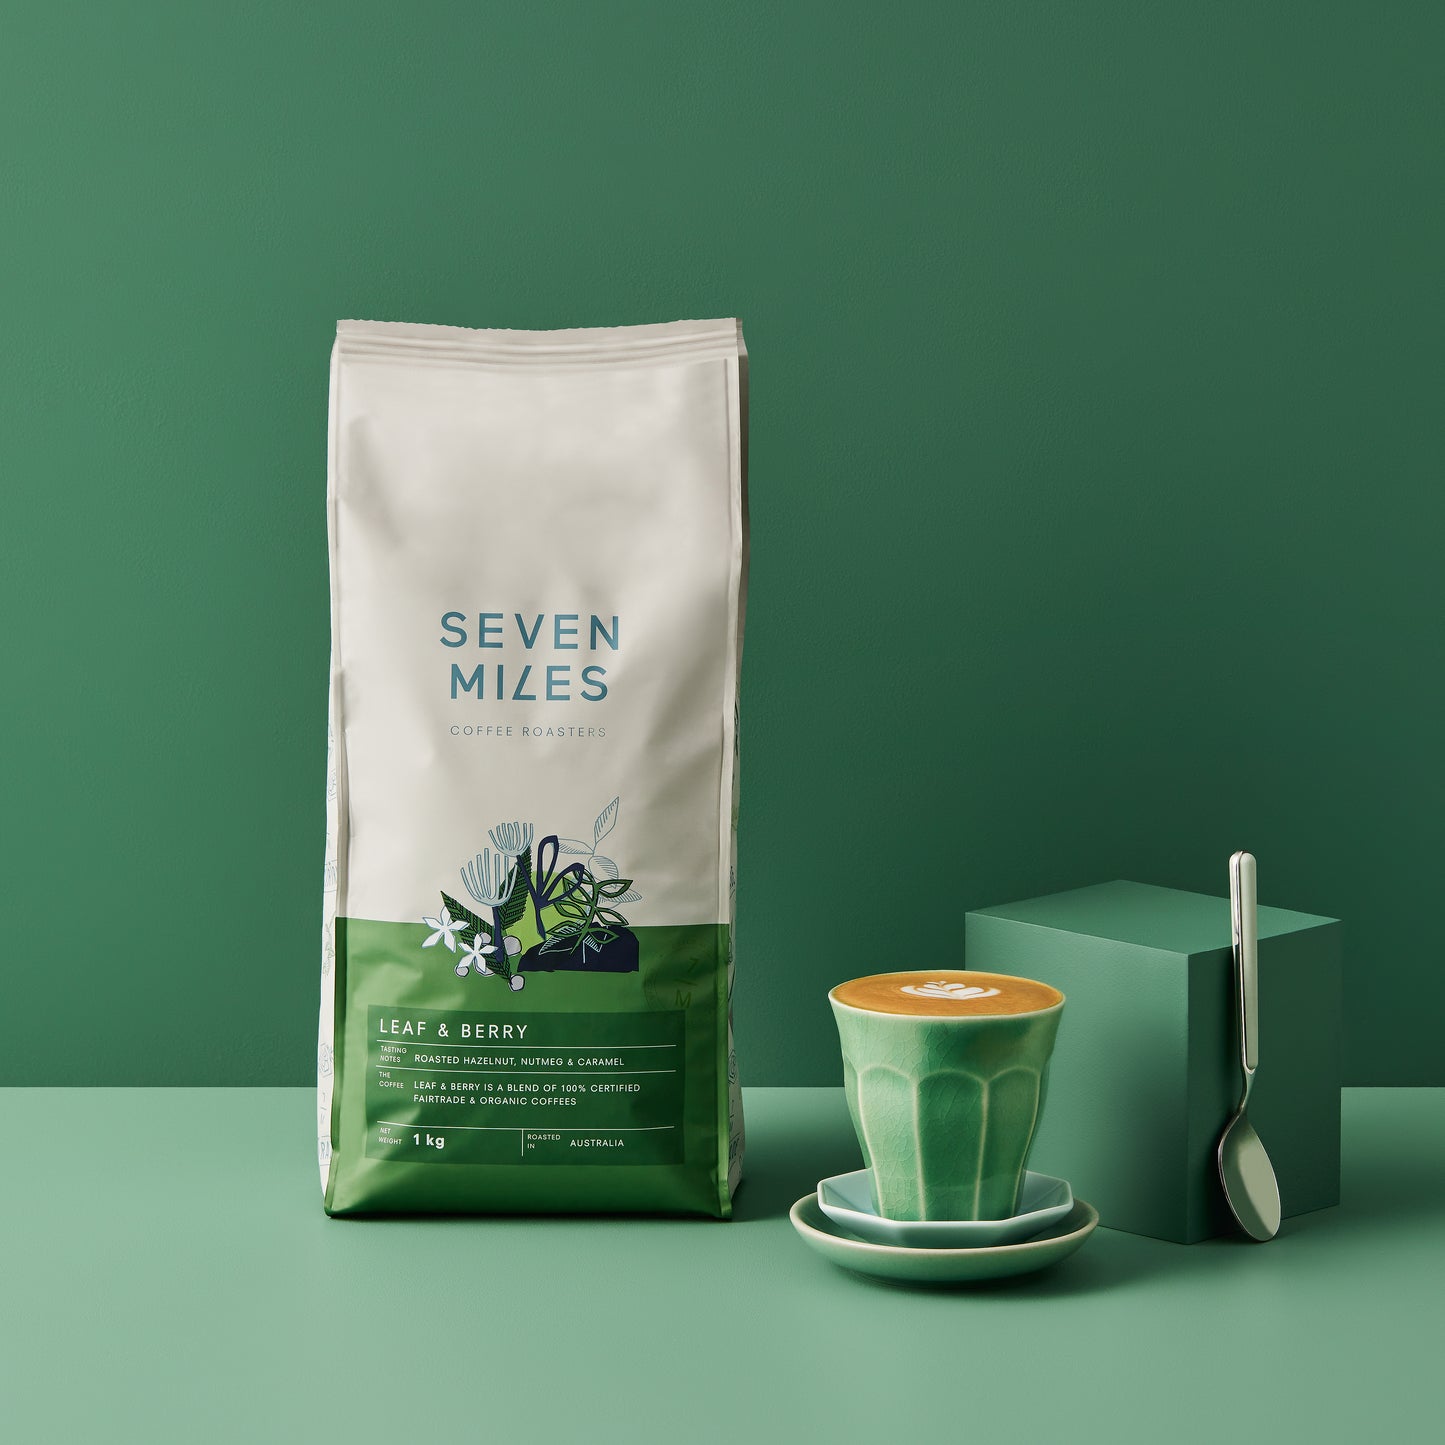 Leaf & Berry is a blend of 100% certified Fairtrade and organic coffees. Our roaster uses a light/medium roast profile to reveal the delicate citrus notes with sweet caramel and hazelnut characteristics of these coffees. 